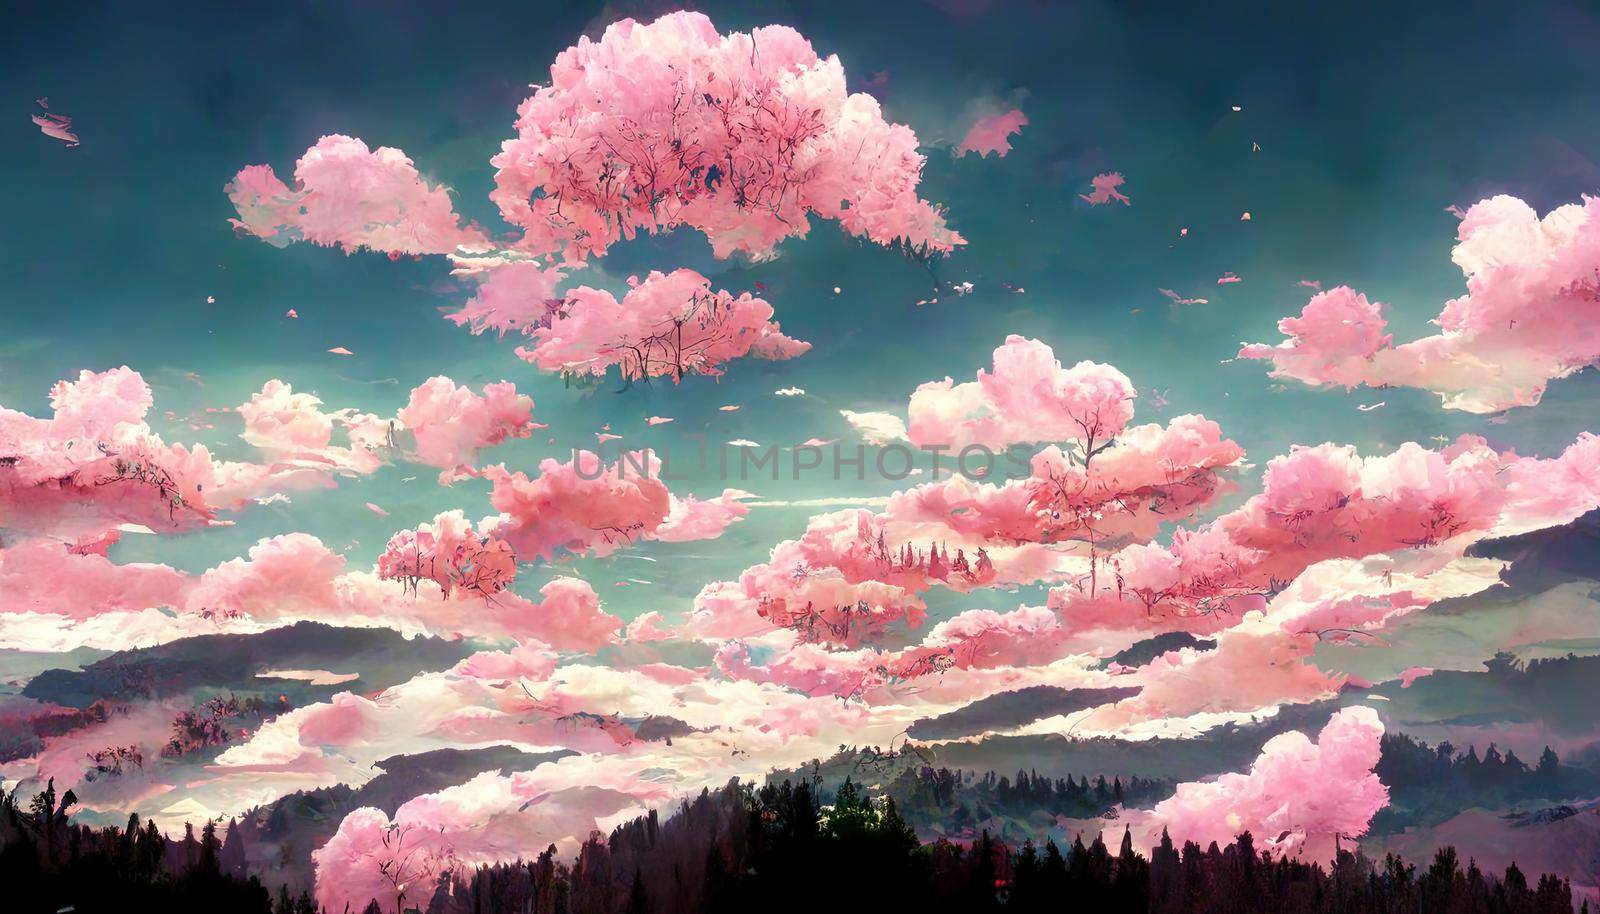 anime style forest with nice clouds and pink sky by 2ragon